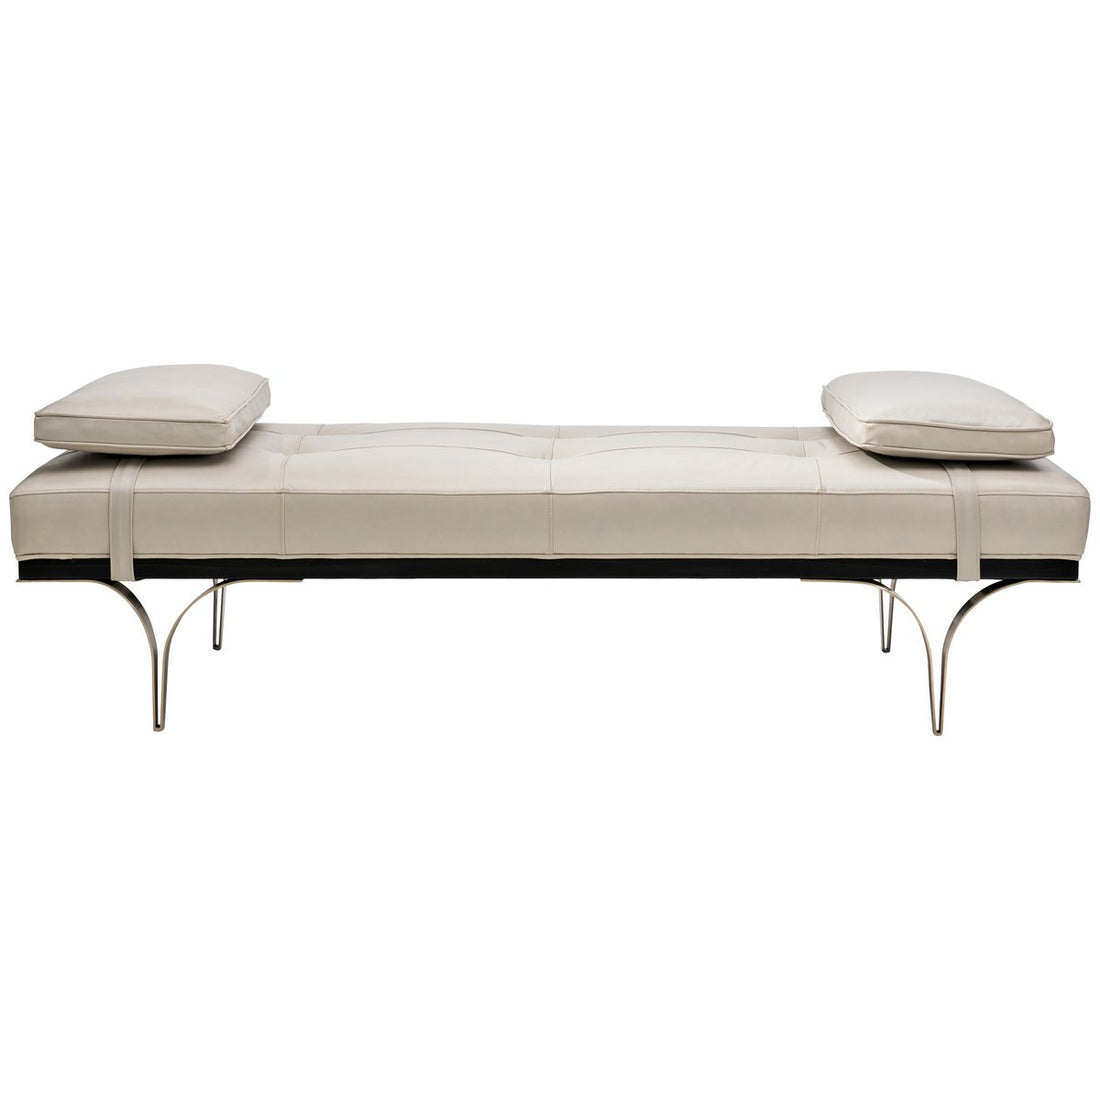 Caracole Modern Edge Head To Head Daybed